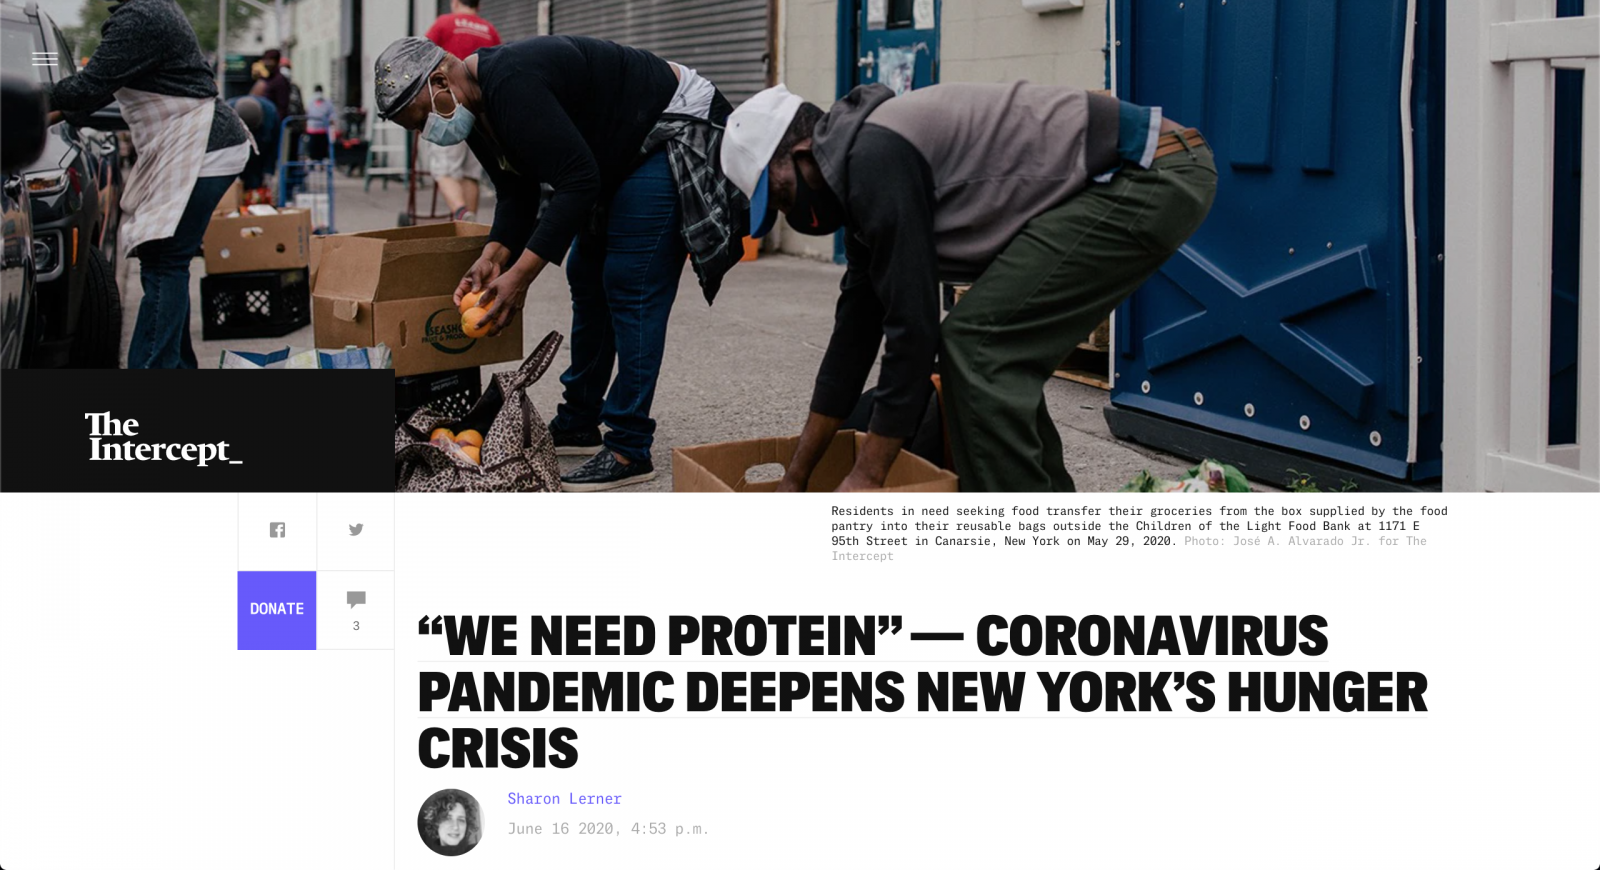 for The Intercept: "WE NEED PROTEIN" " CORONAVIRUS PANDEMIC DEEPENS NEW YORK'S HUNGER CRISIS